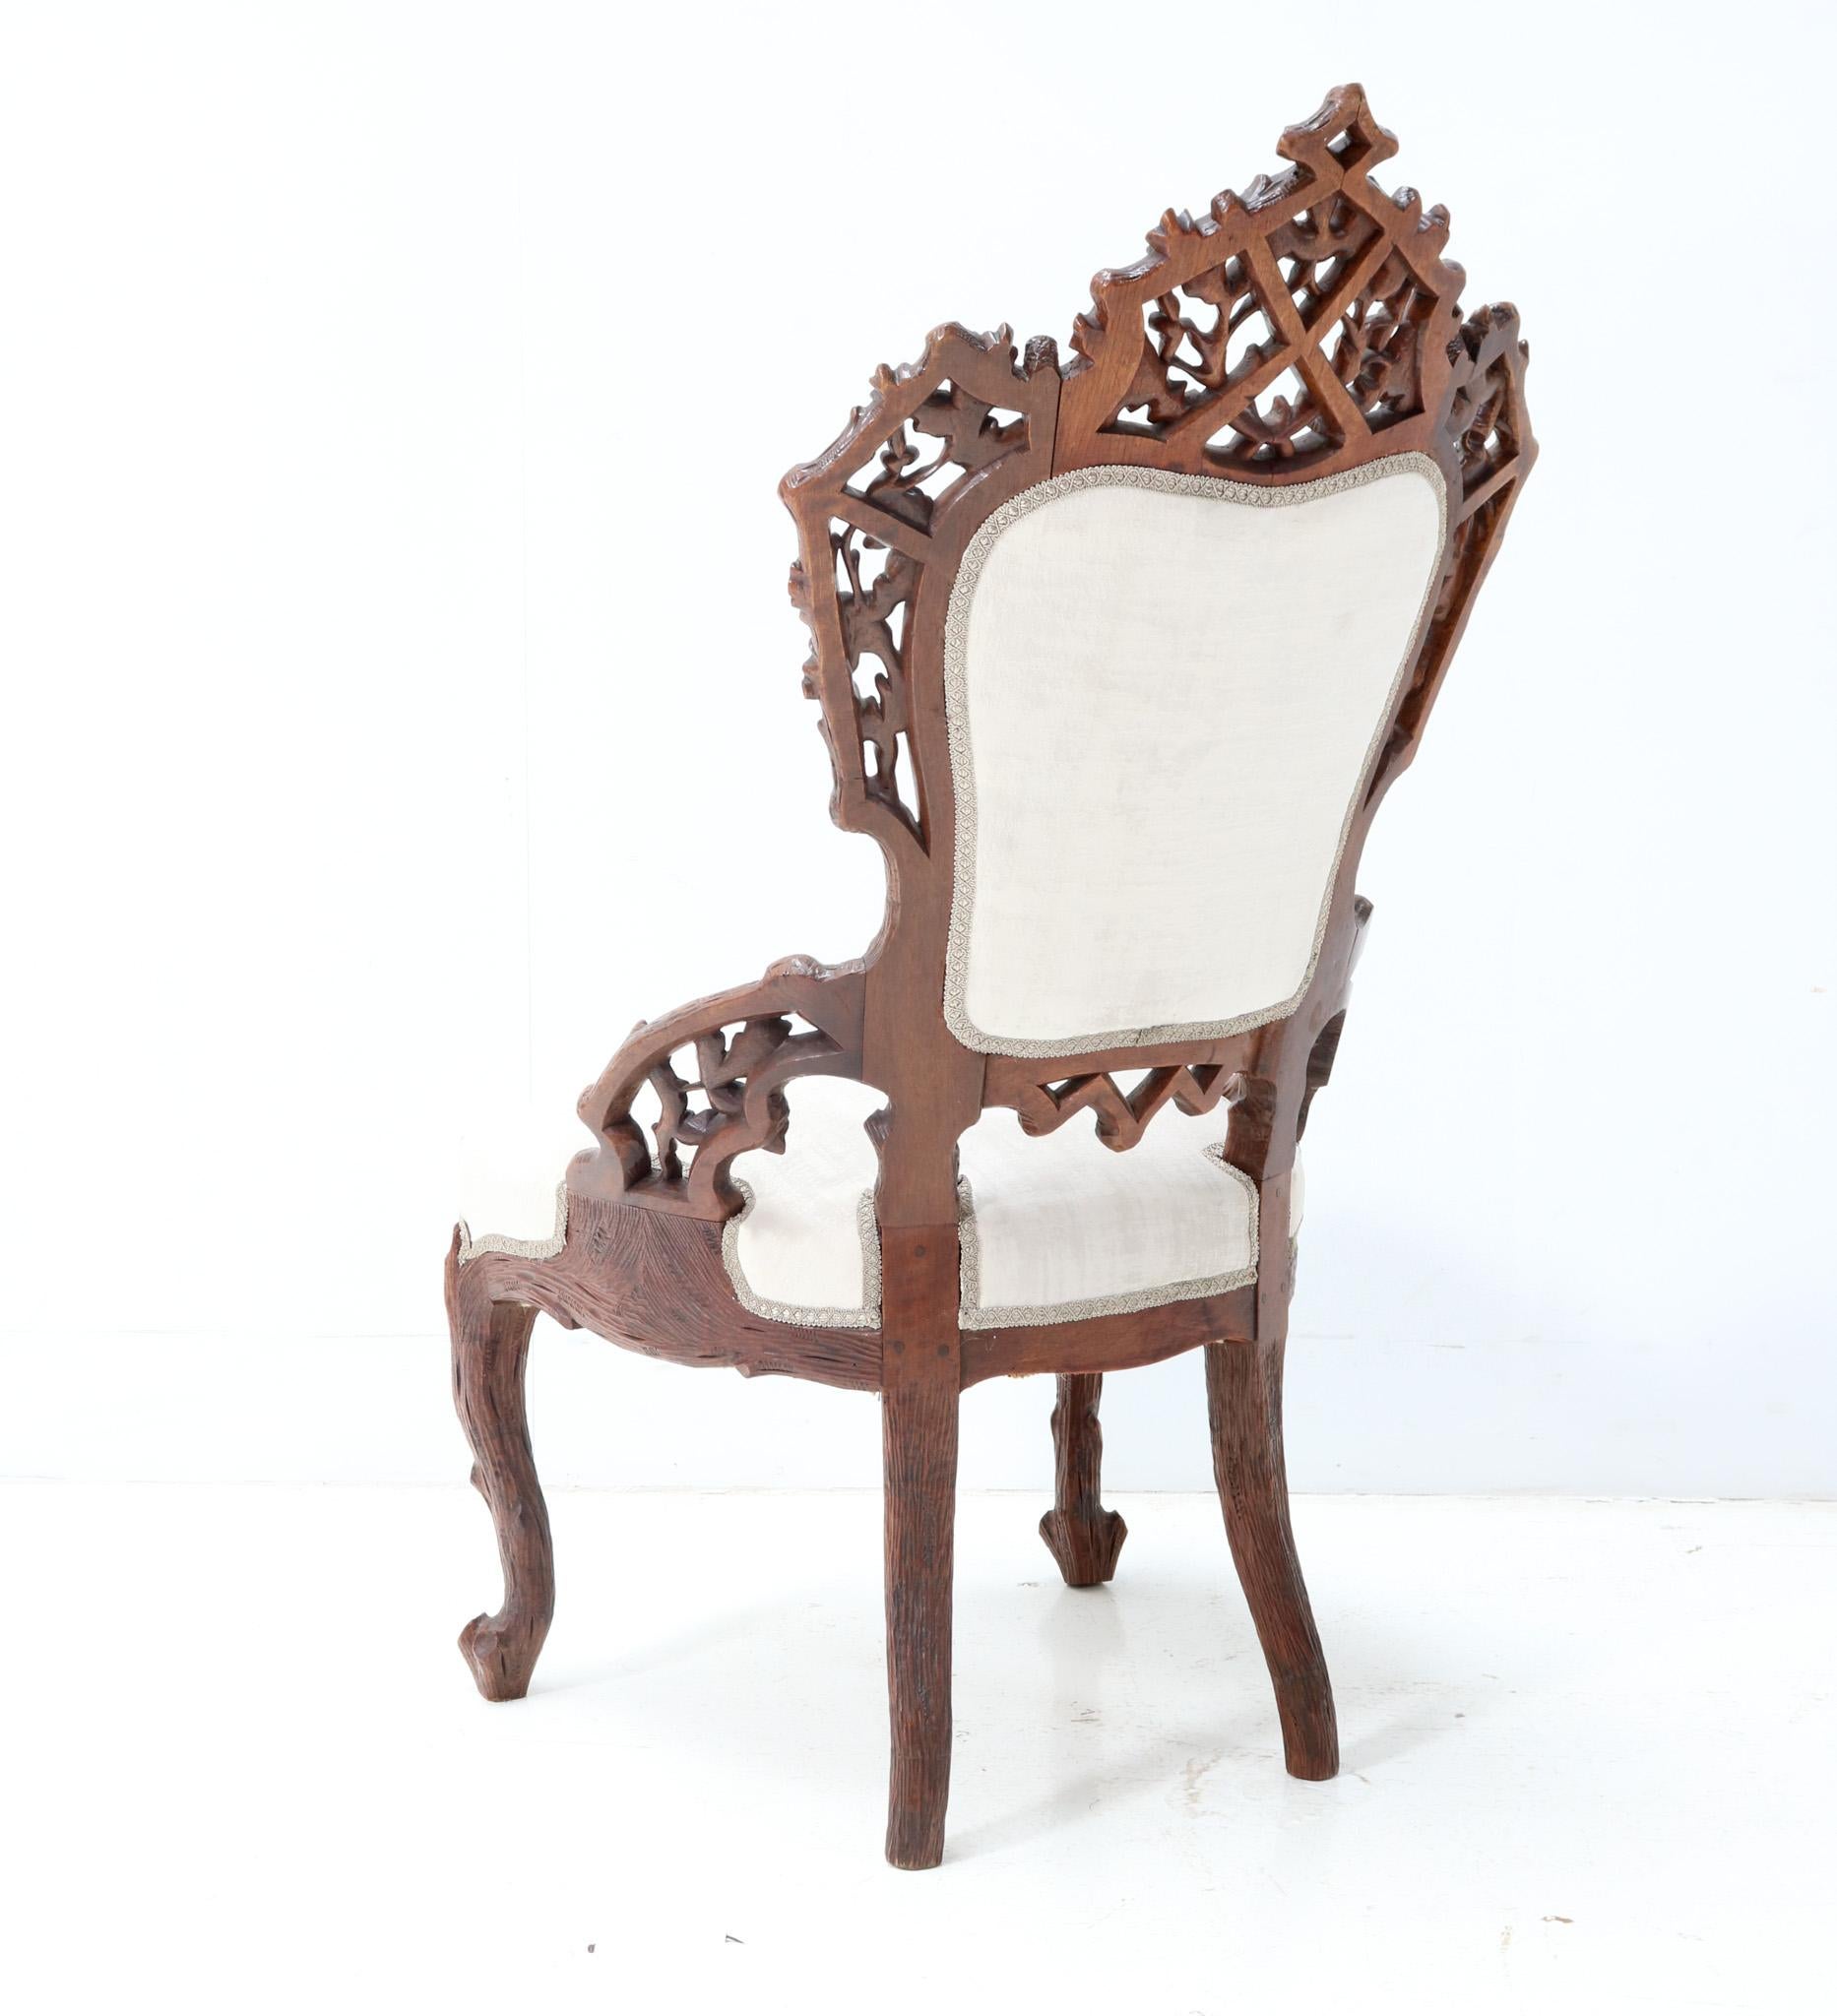 Late 19th Century Black Forest Walnut Armchair or Reading Chair by Matthijs Horrix for Horrix For Sale